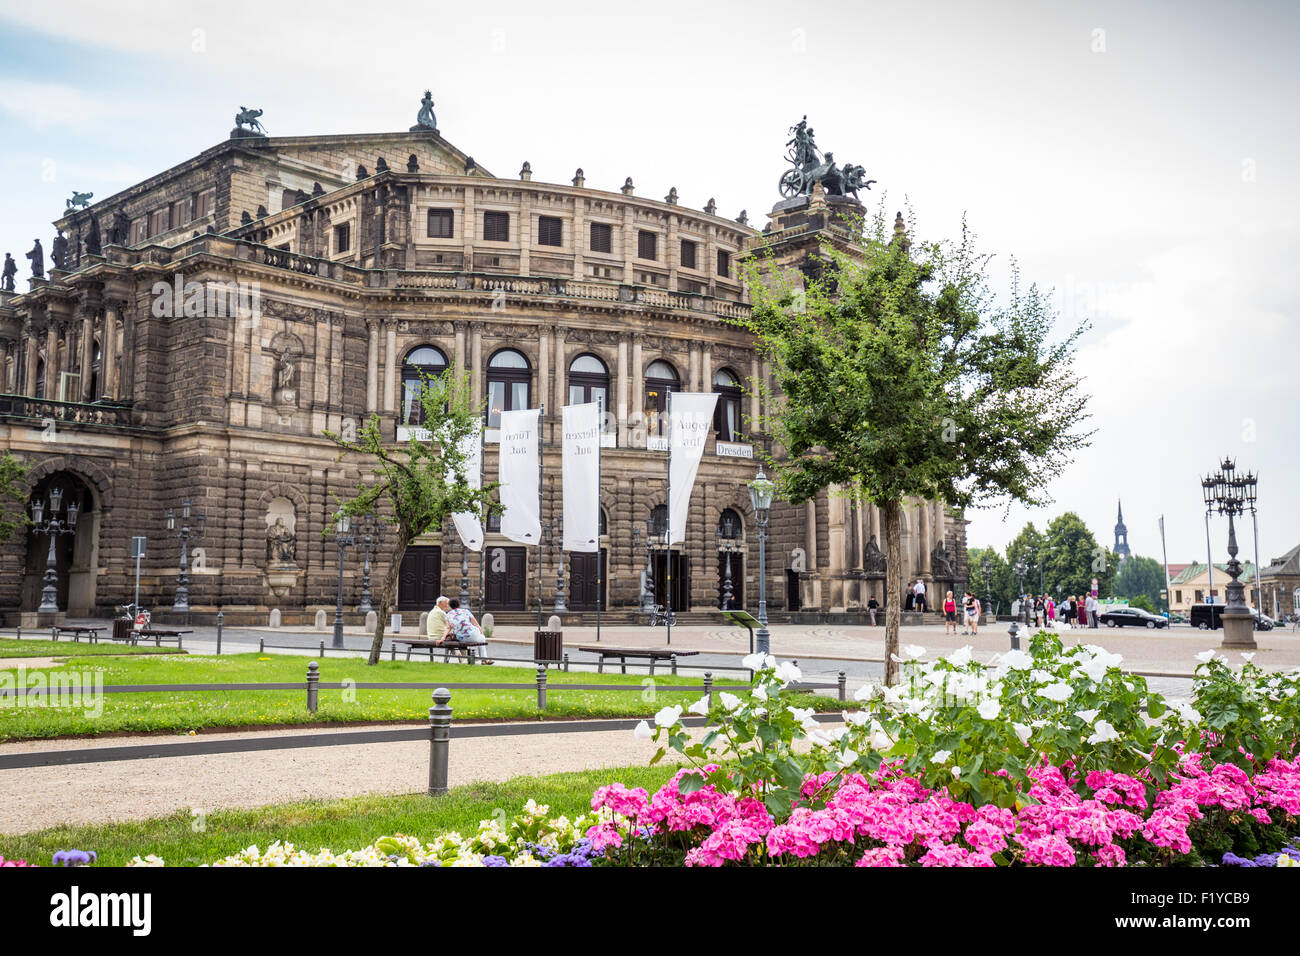 Semperoper opera house at Theaterplatz square Altstadt the old town Dresden, Saxony, Germany, Europe Stock Photo